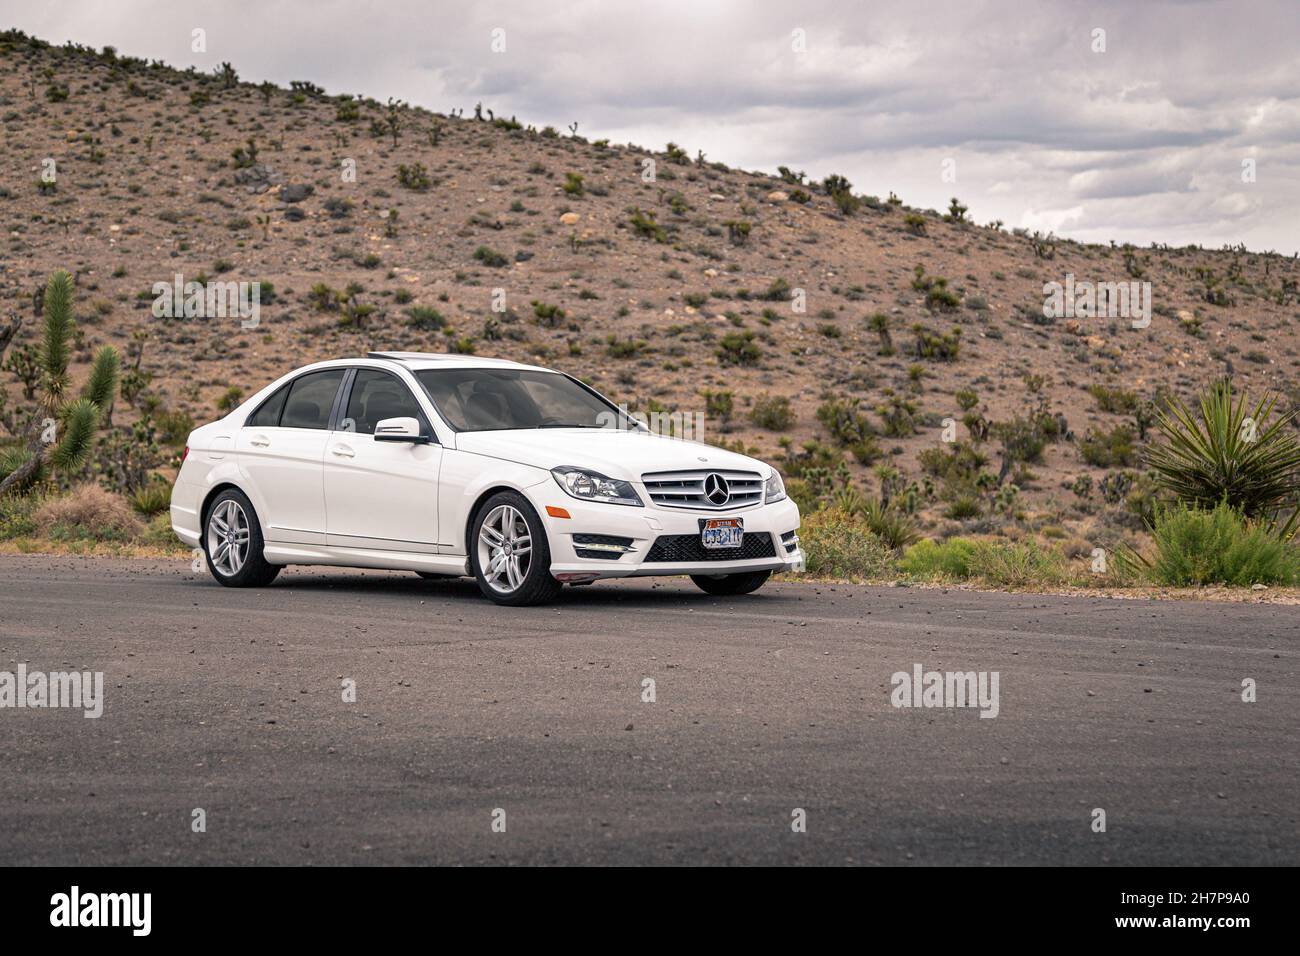 LAS VEGAS, UNITED STATES - May 22, 2015: Front view of white 2014 Mercedes-Benz C-Class, a small luxury sedan, in the desert landscape of Nevada, USA. Stock Photo